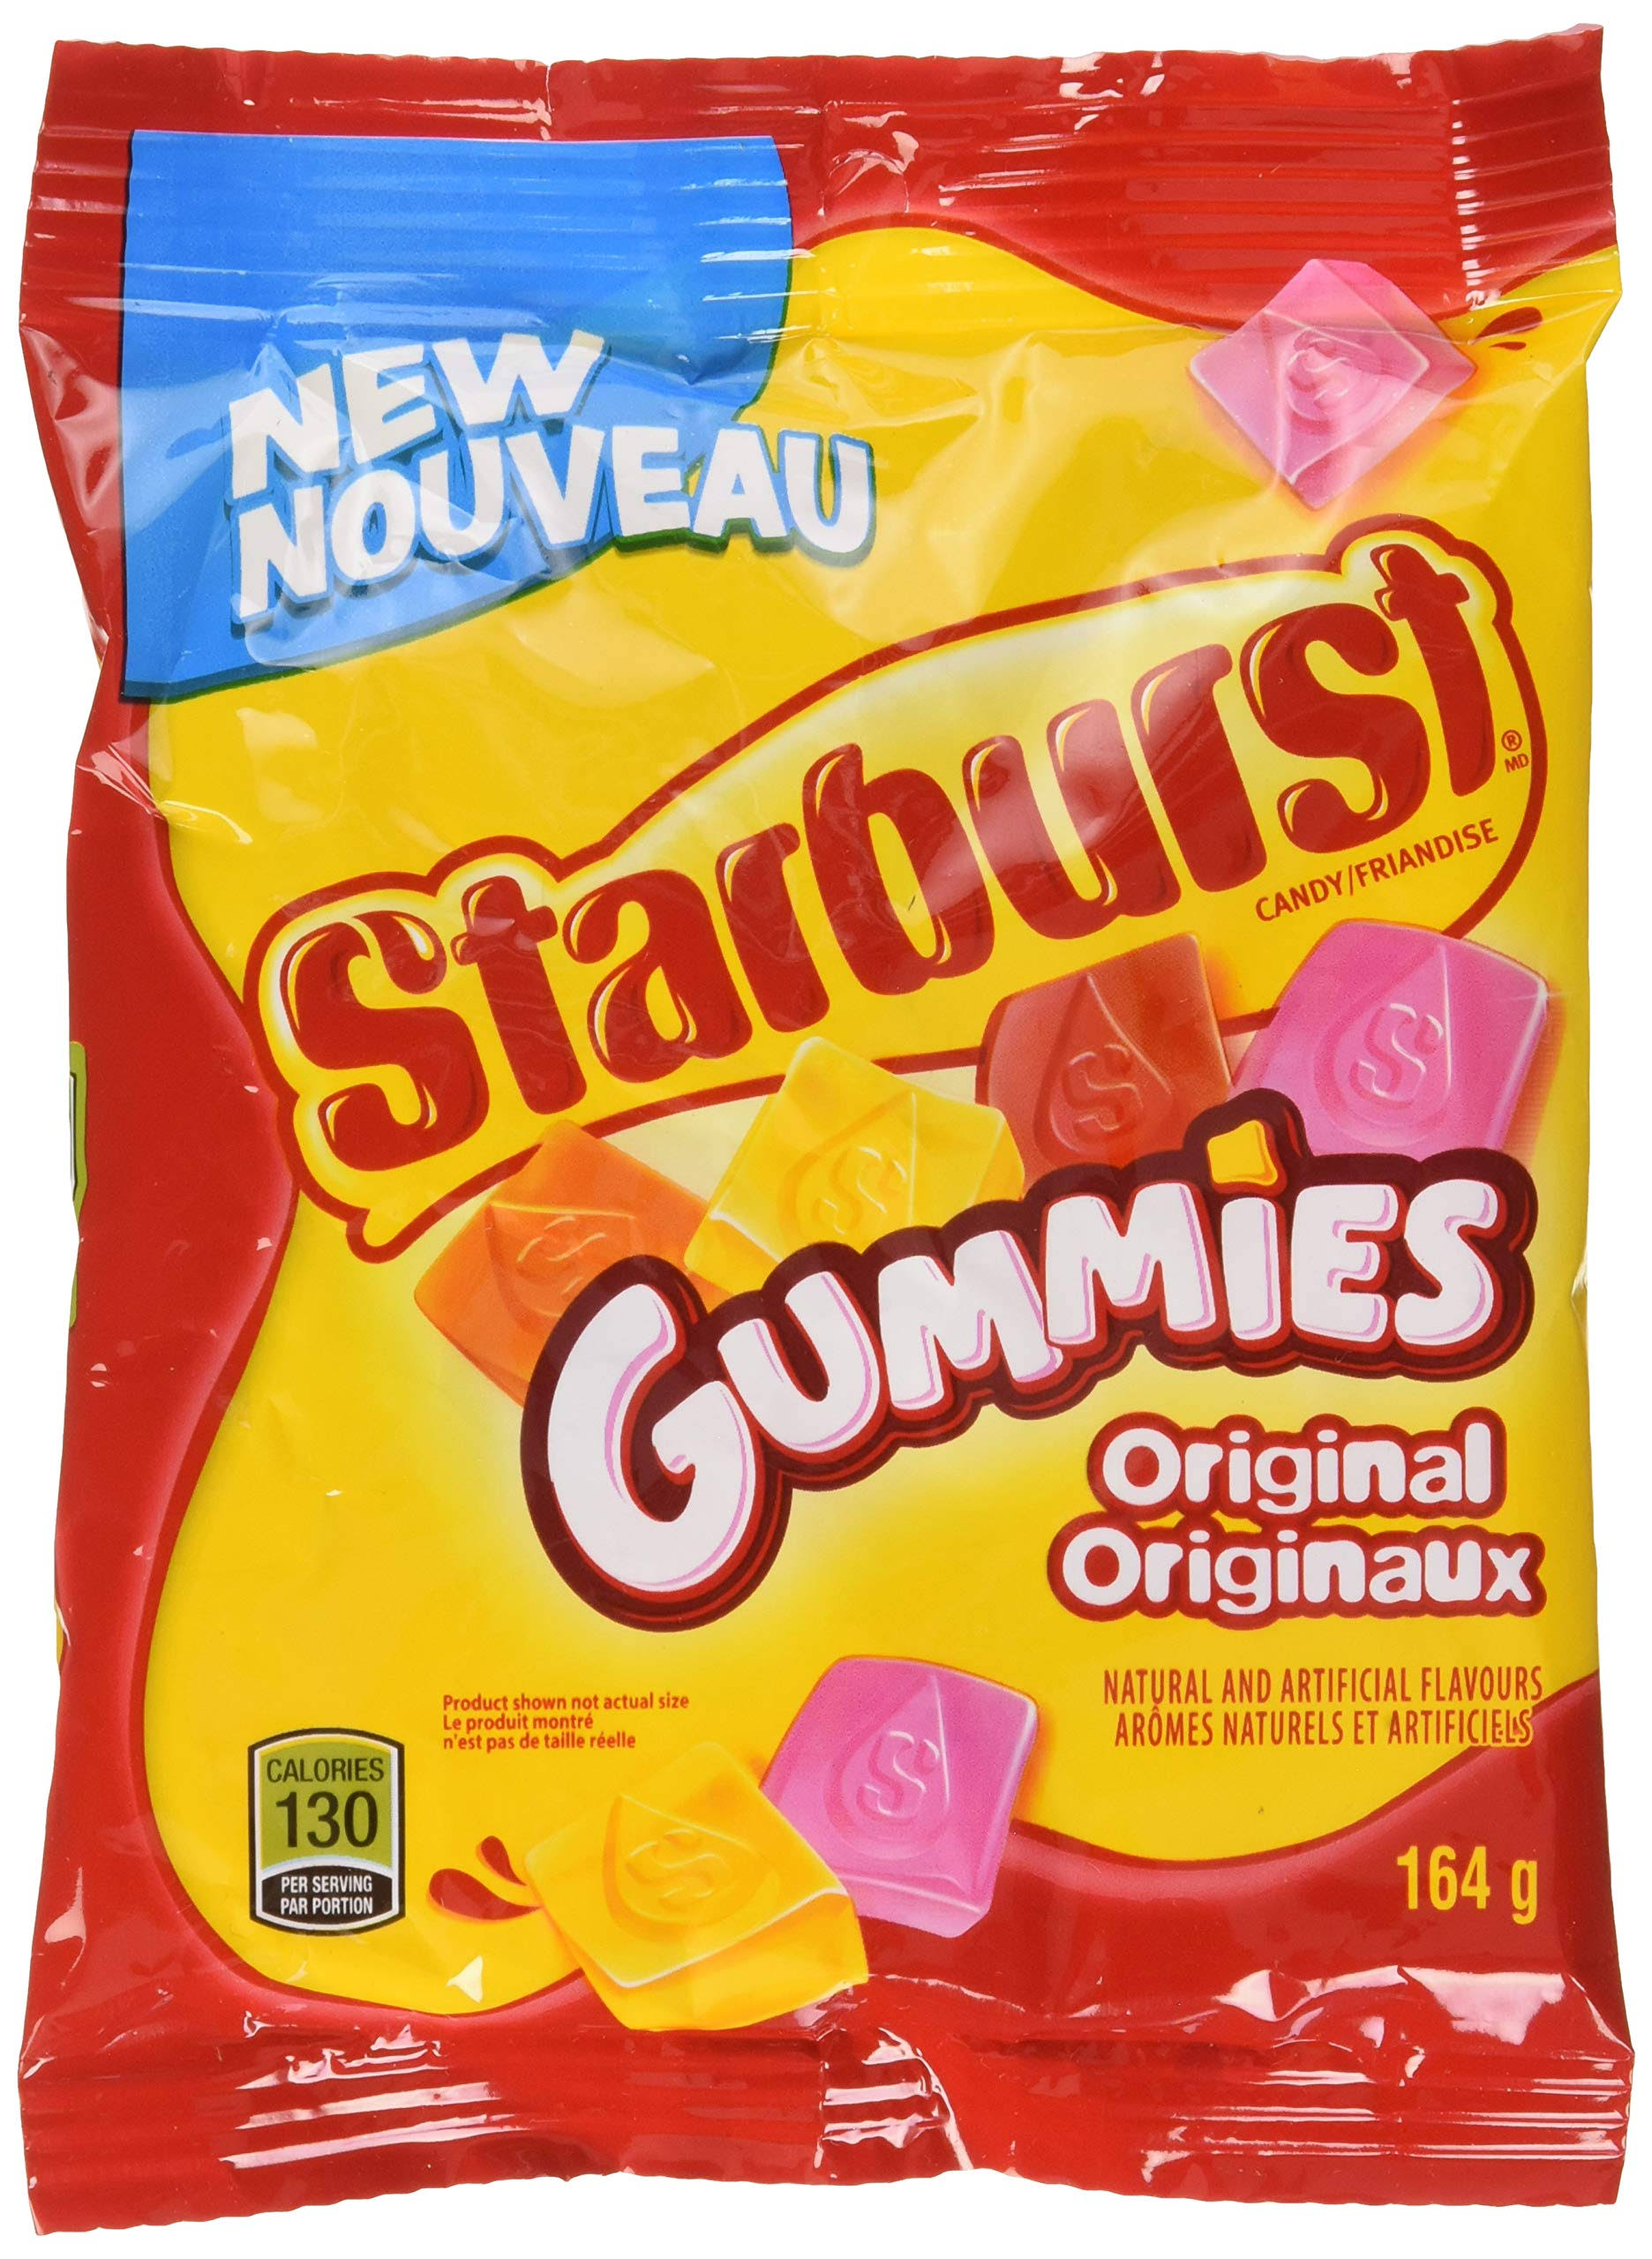 Starburst Gummies Original Candy 164g/5.8oz Imported from Canada